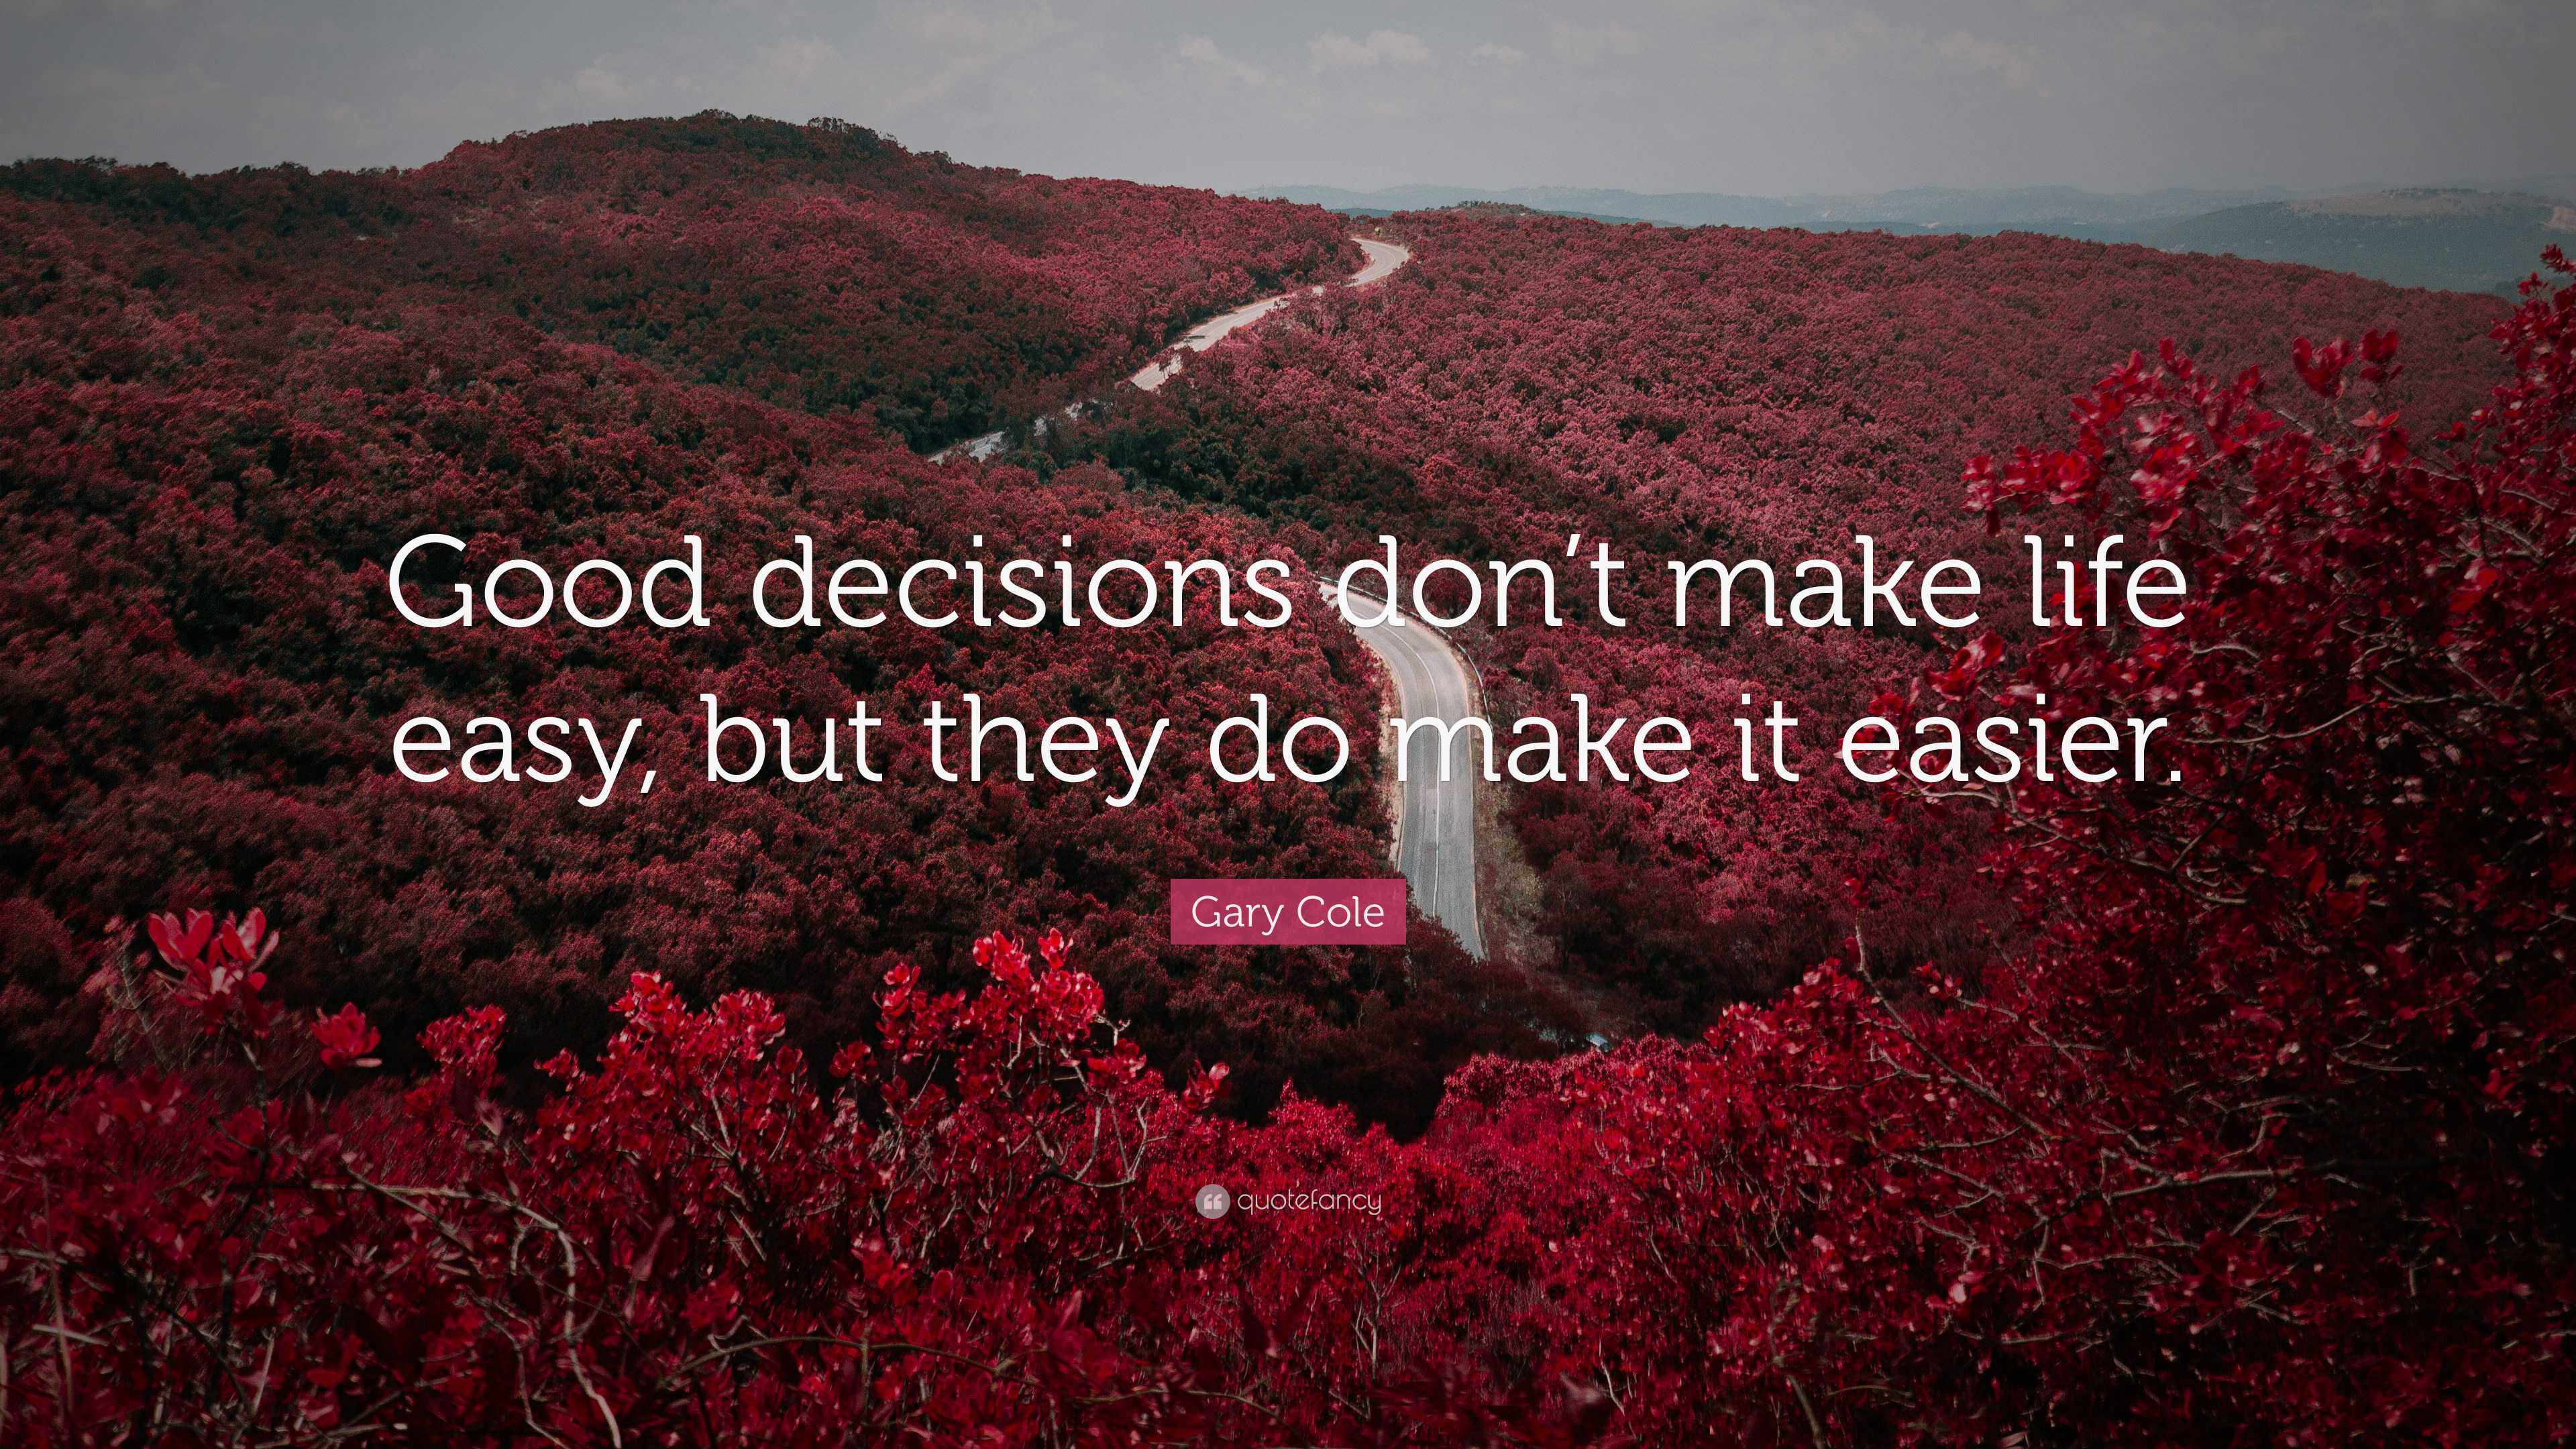 https://quotefancy.com/media/wallpaper/3840x2160/7985402-Gary-Cole-Quote-Good-decisions-don-t-make-life-easy-but-they-do.jpg